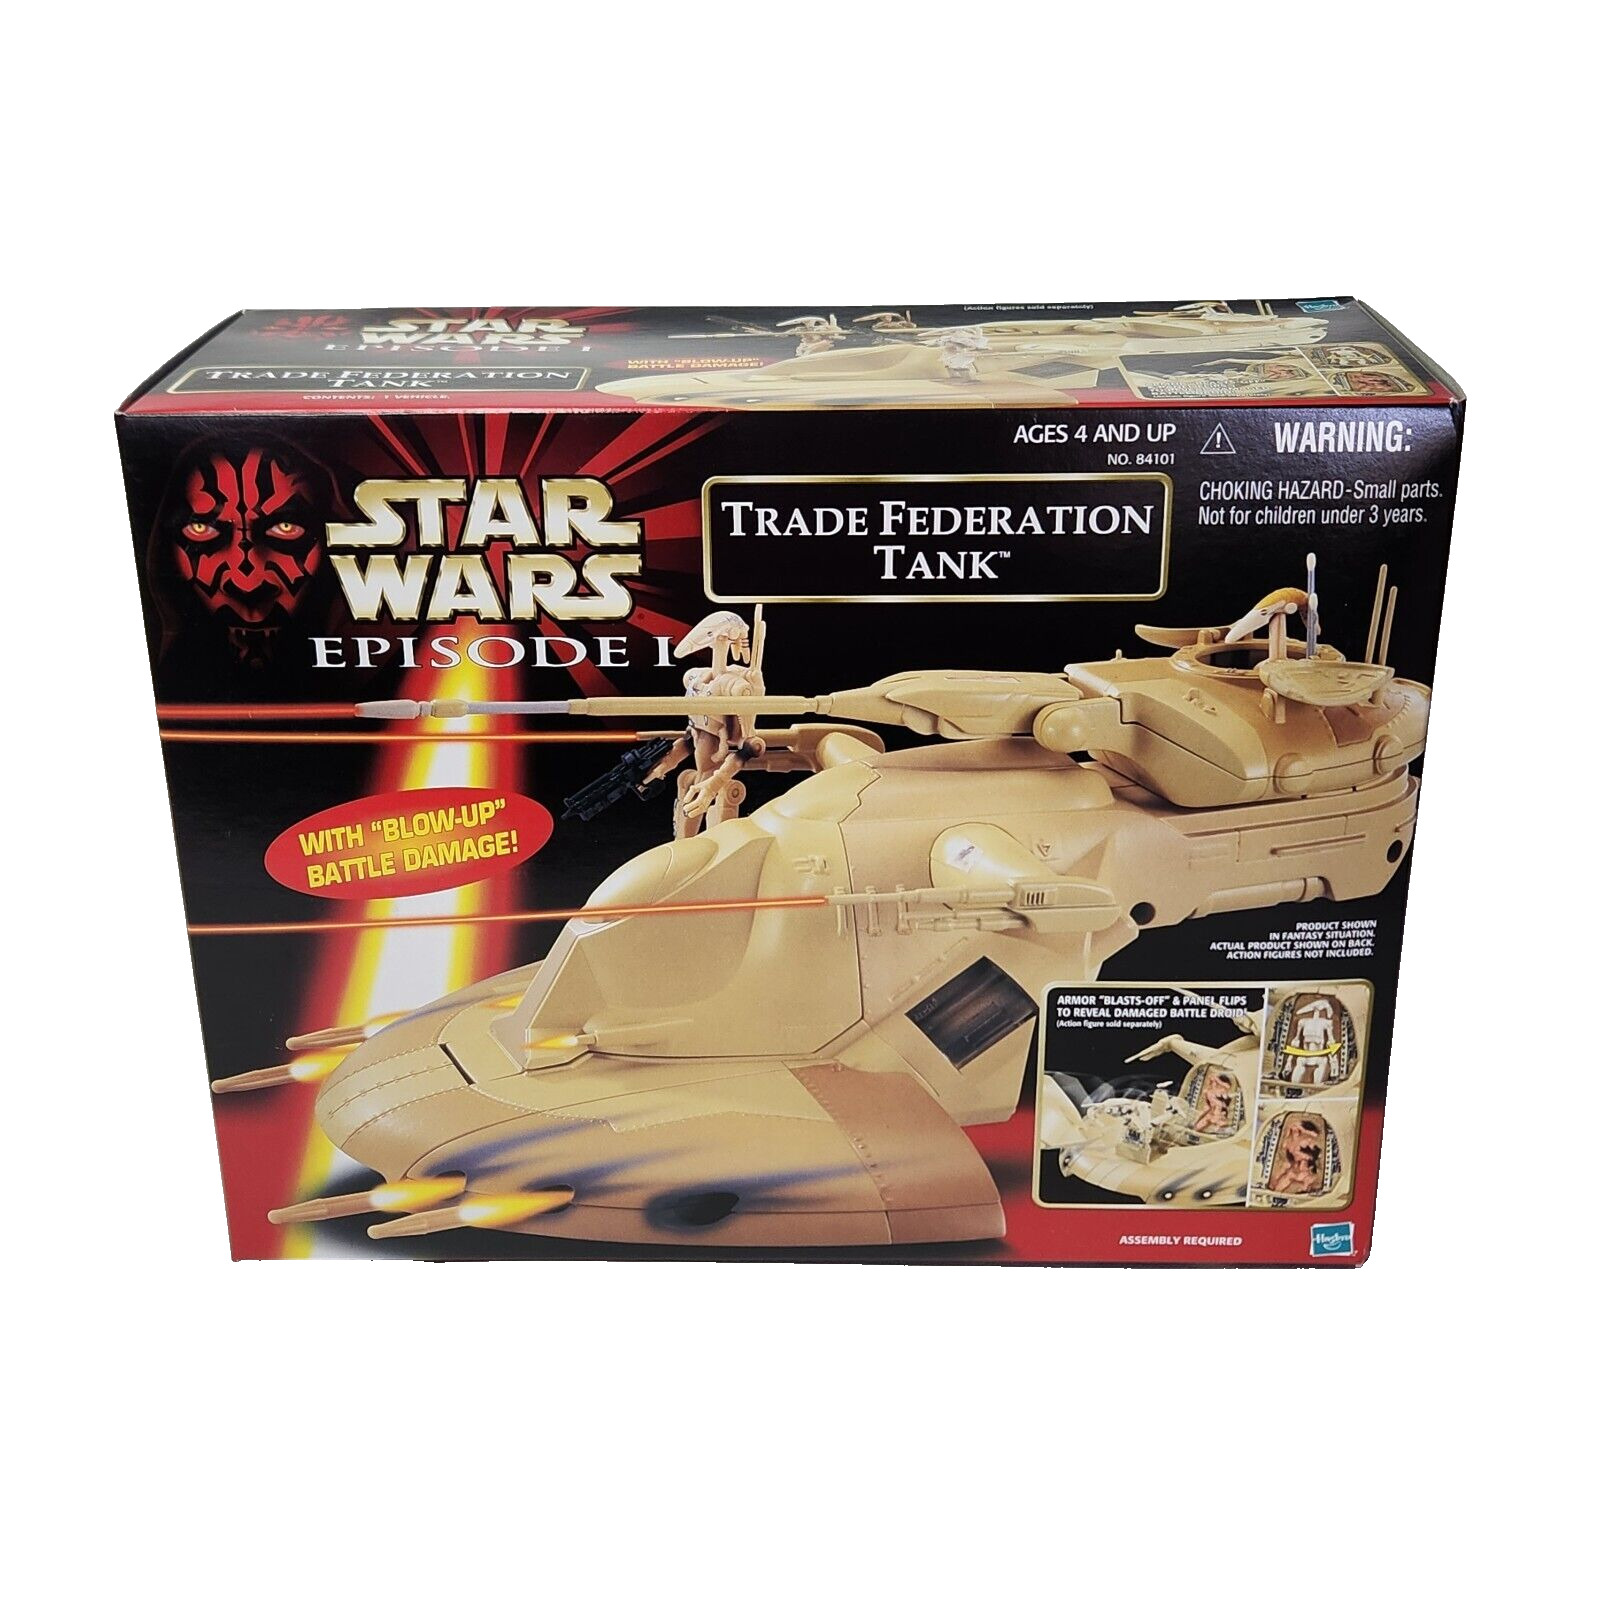 VINTAGE 1999 STAR WARS EPISODE 1 TRADE FEDERATION TANK NEW IN BOX VEHICLE